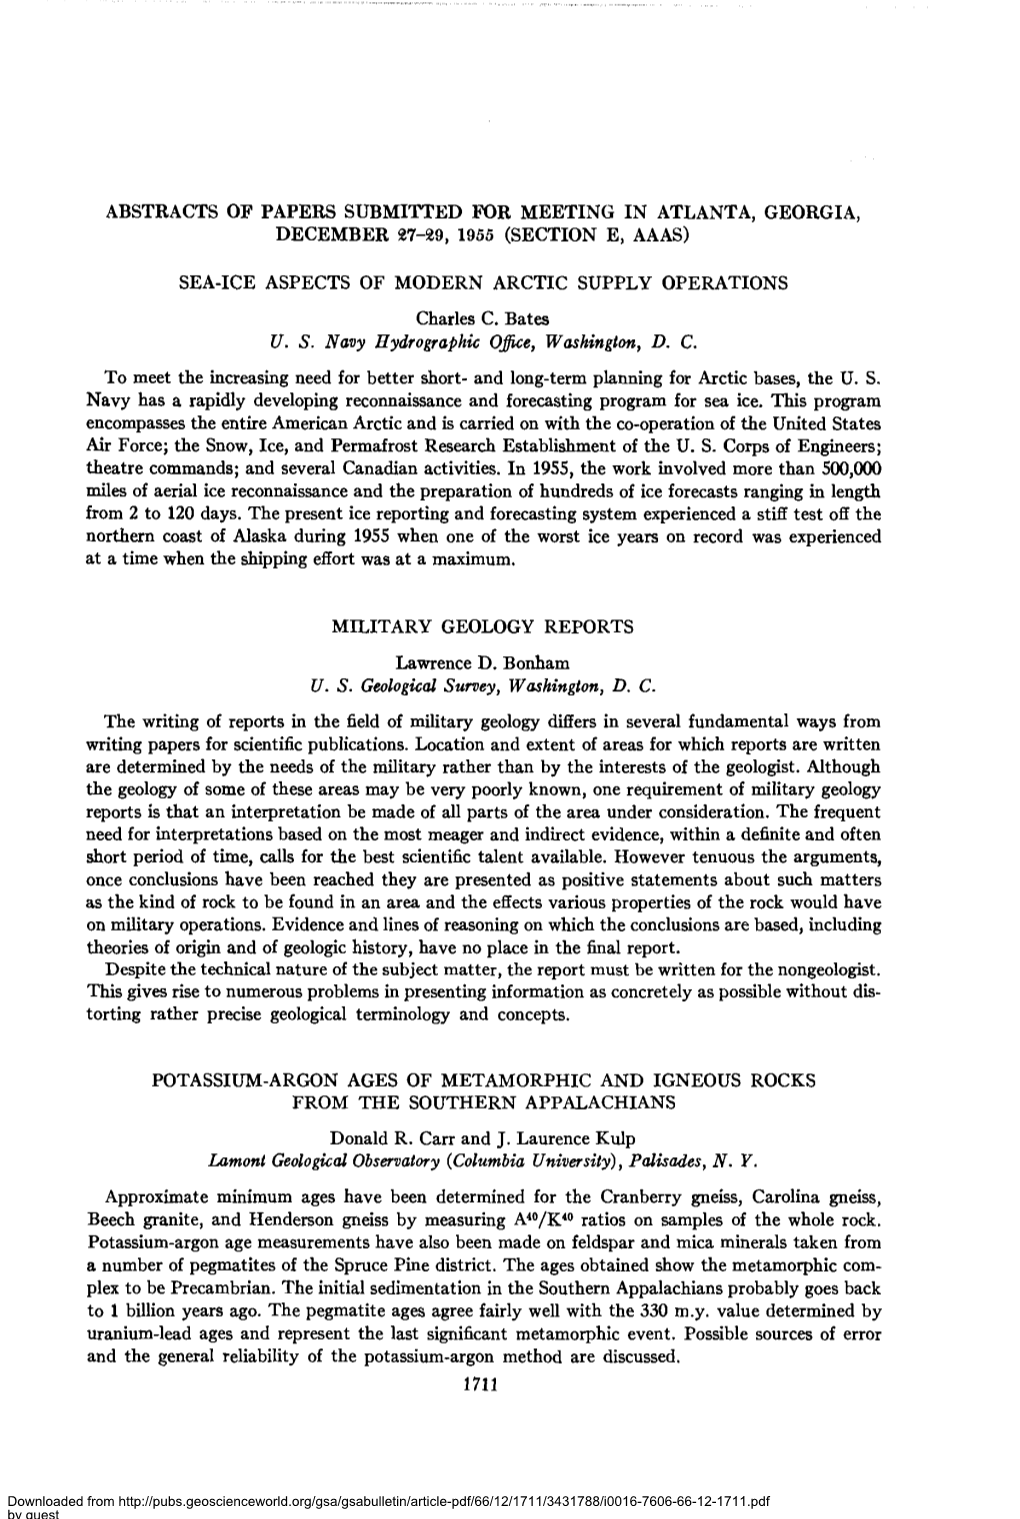 Abstracts of Papers Submitted for Meeting in Atlanta, Georgia, December 27-29, 1955 (Section E, Aaas)